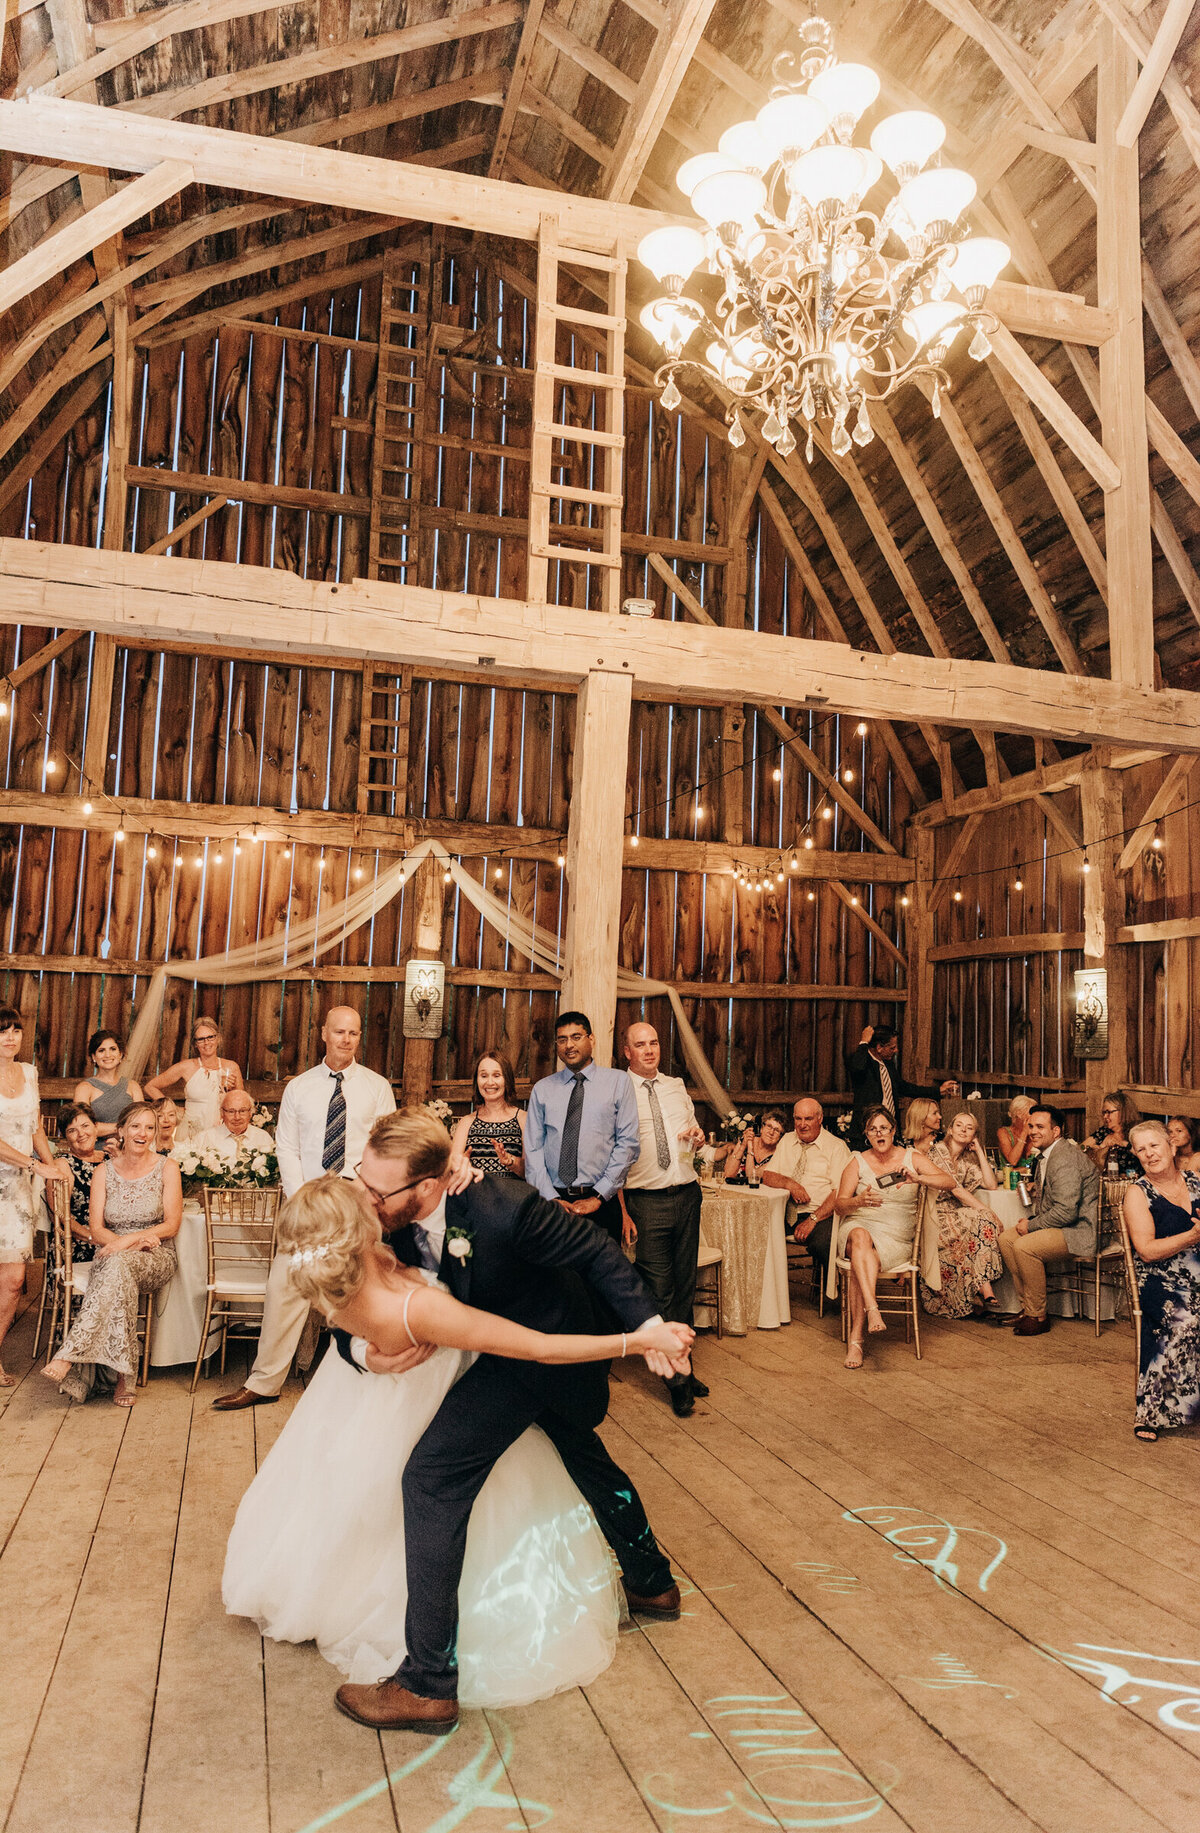 Bride and groom's first dance at elegant wedding reception